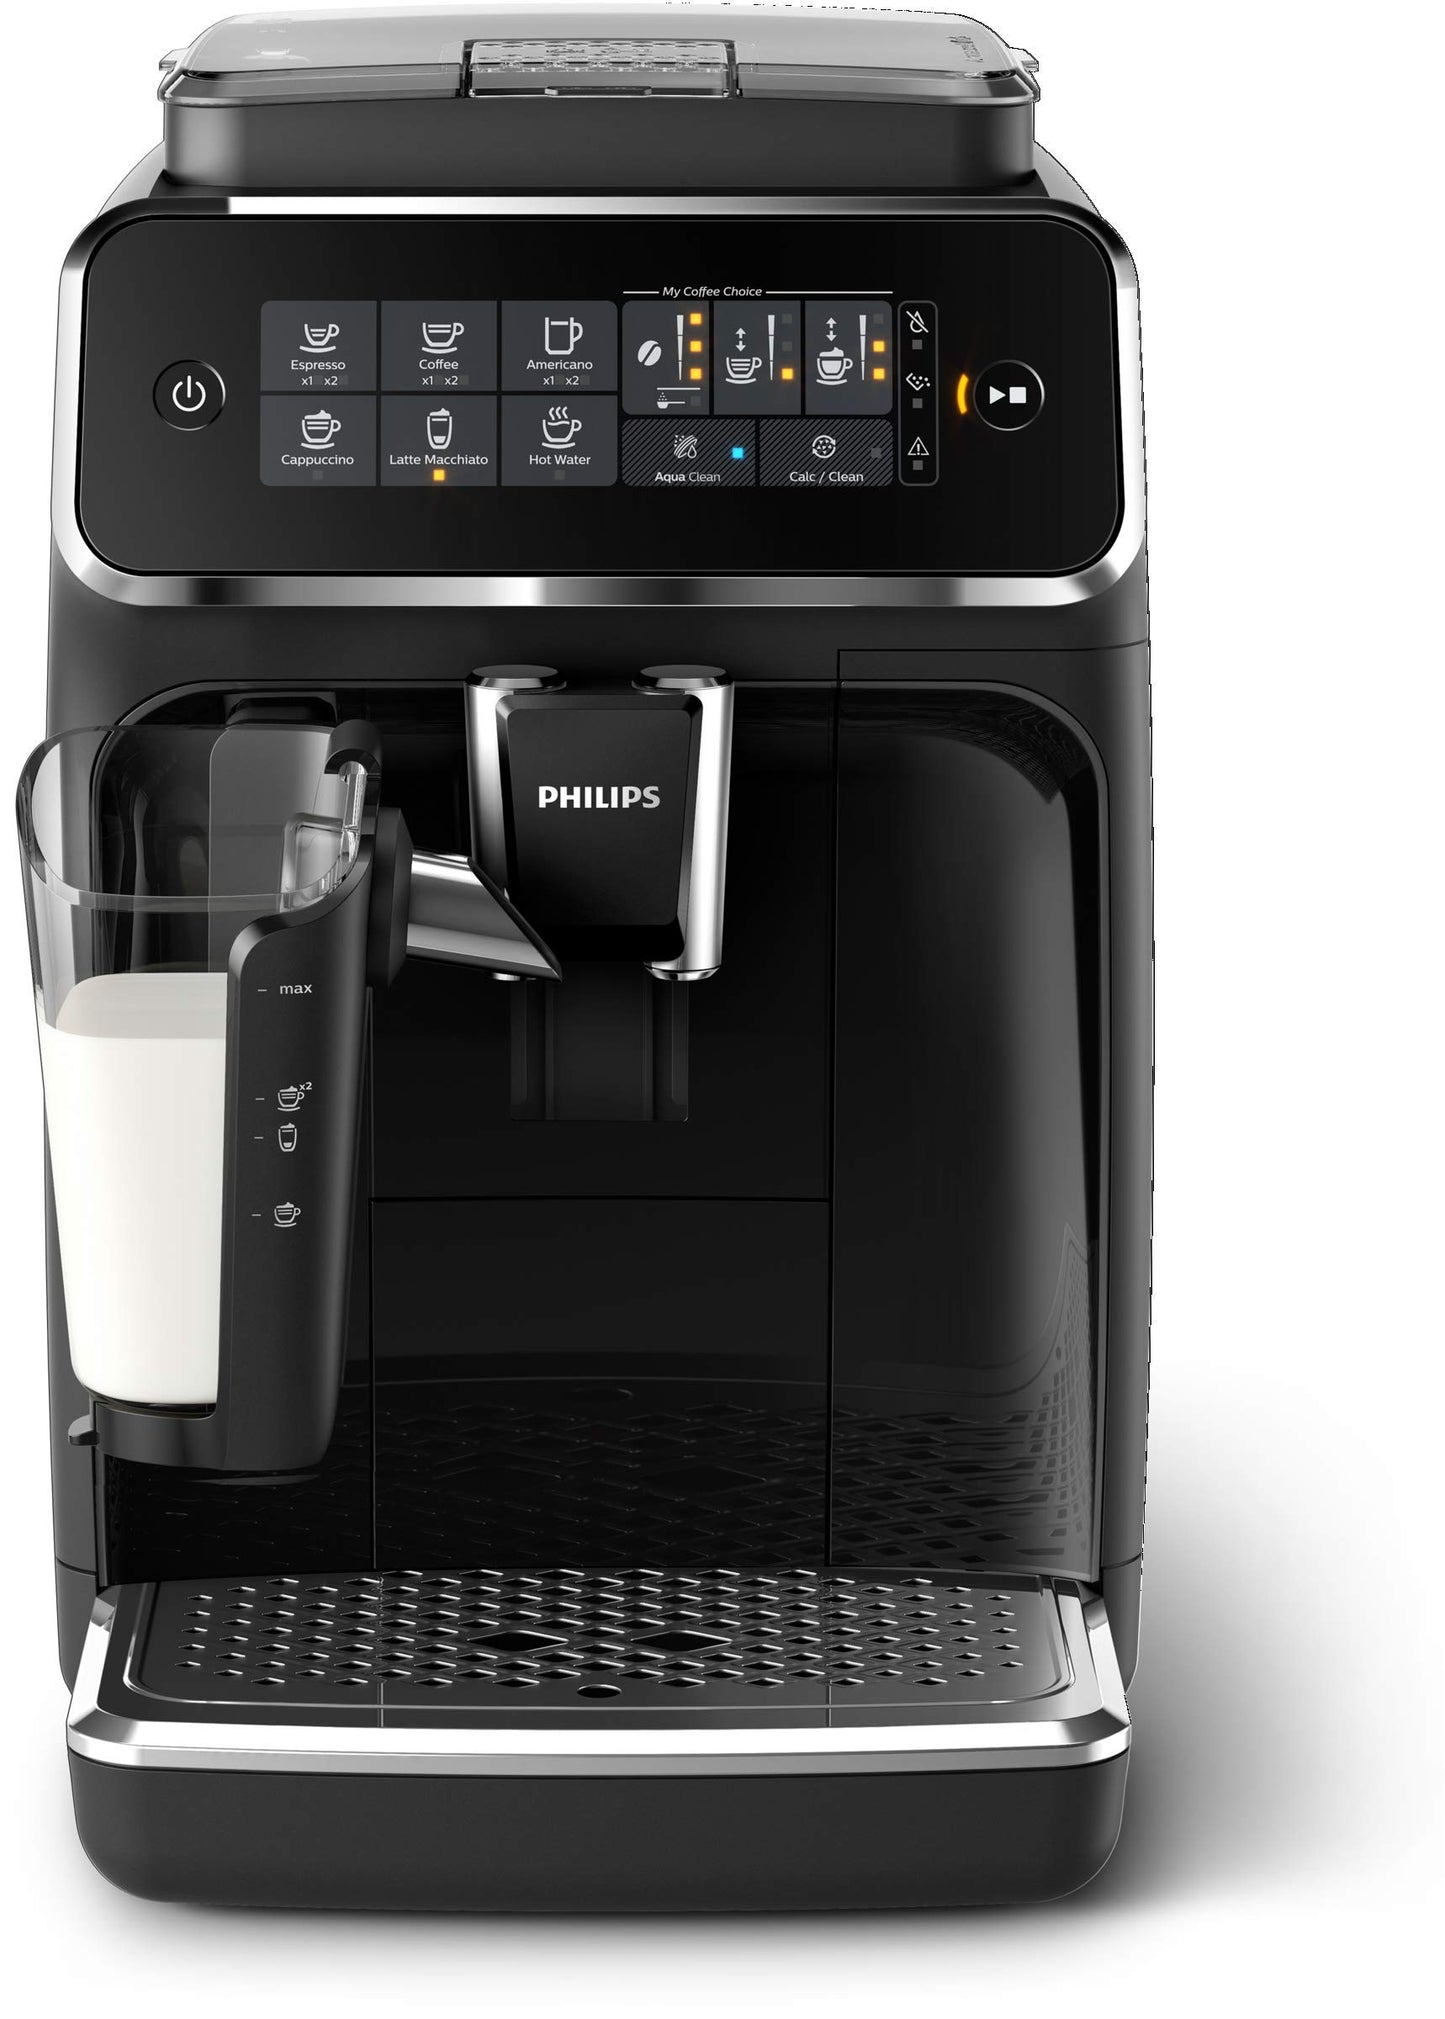 Philips 3200 Series Fully Automatic Espresso Machine with LatteGo, Black, EP3241/54 with Philips Saeco AquaClean Filter Single Unit, CA6903/10